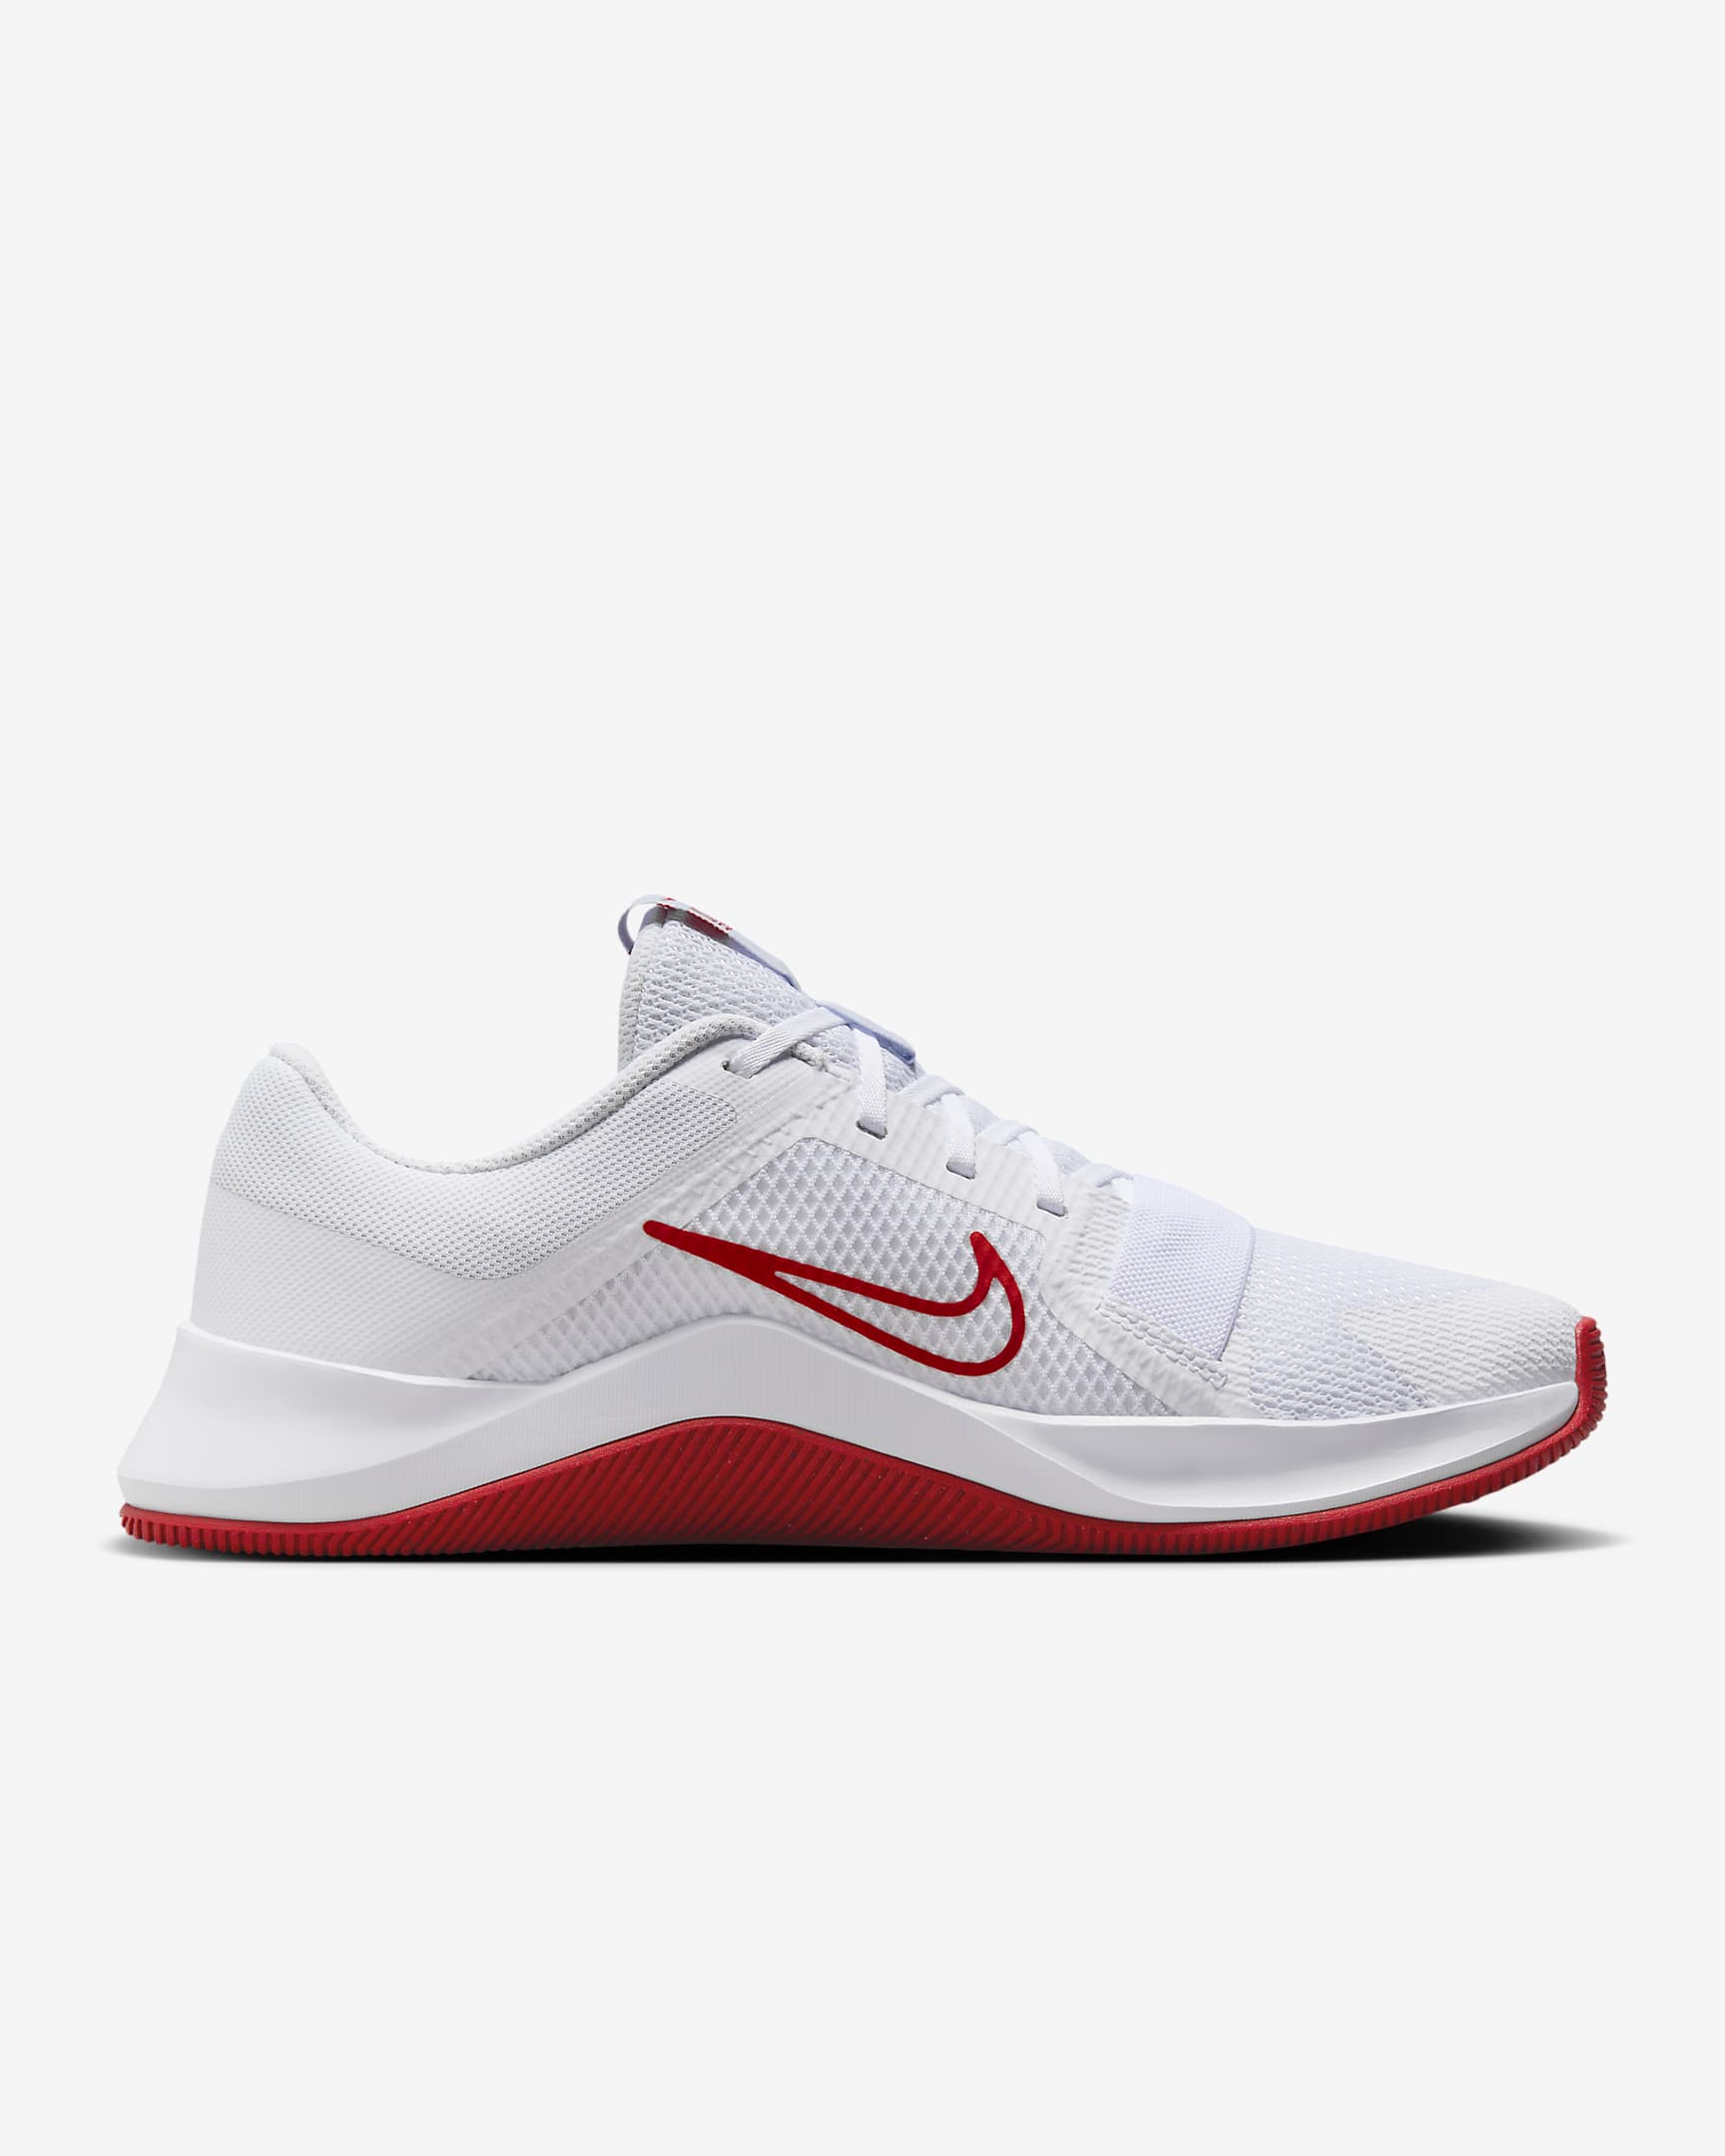 Nike MC Trainer 2 Men's Workout Shoes. Nike HR